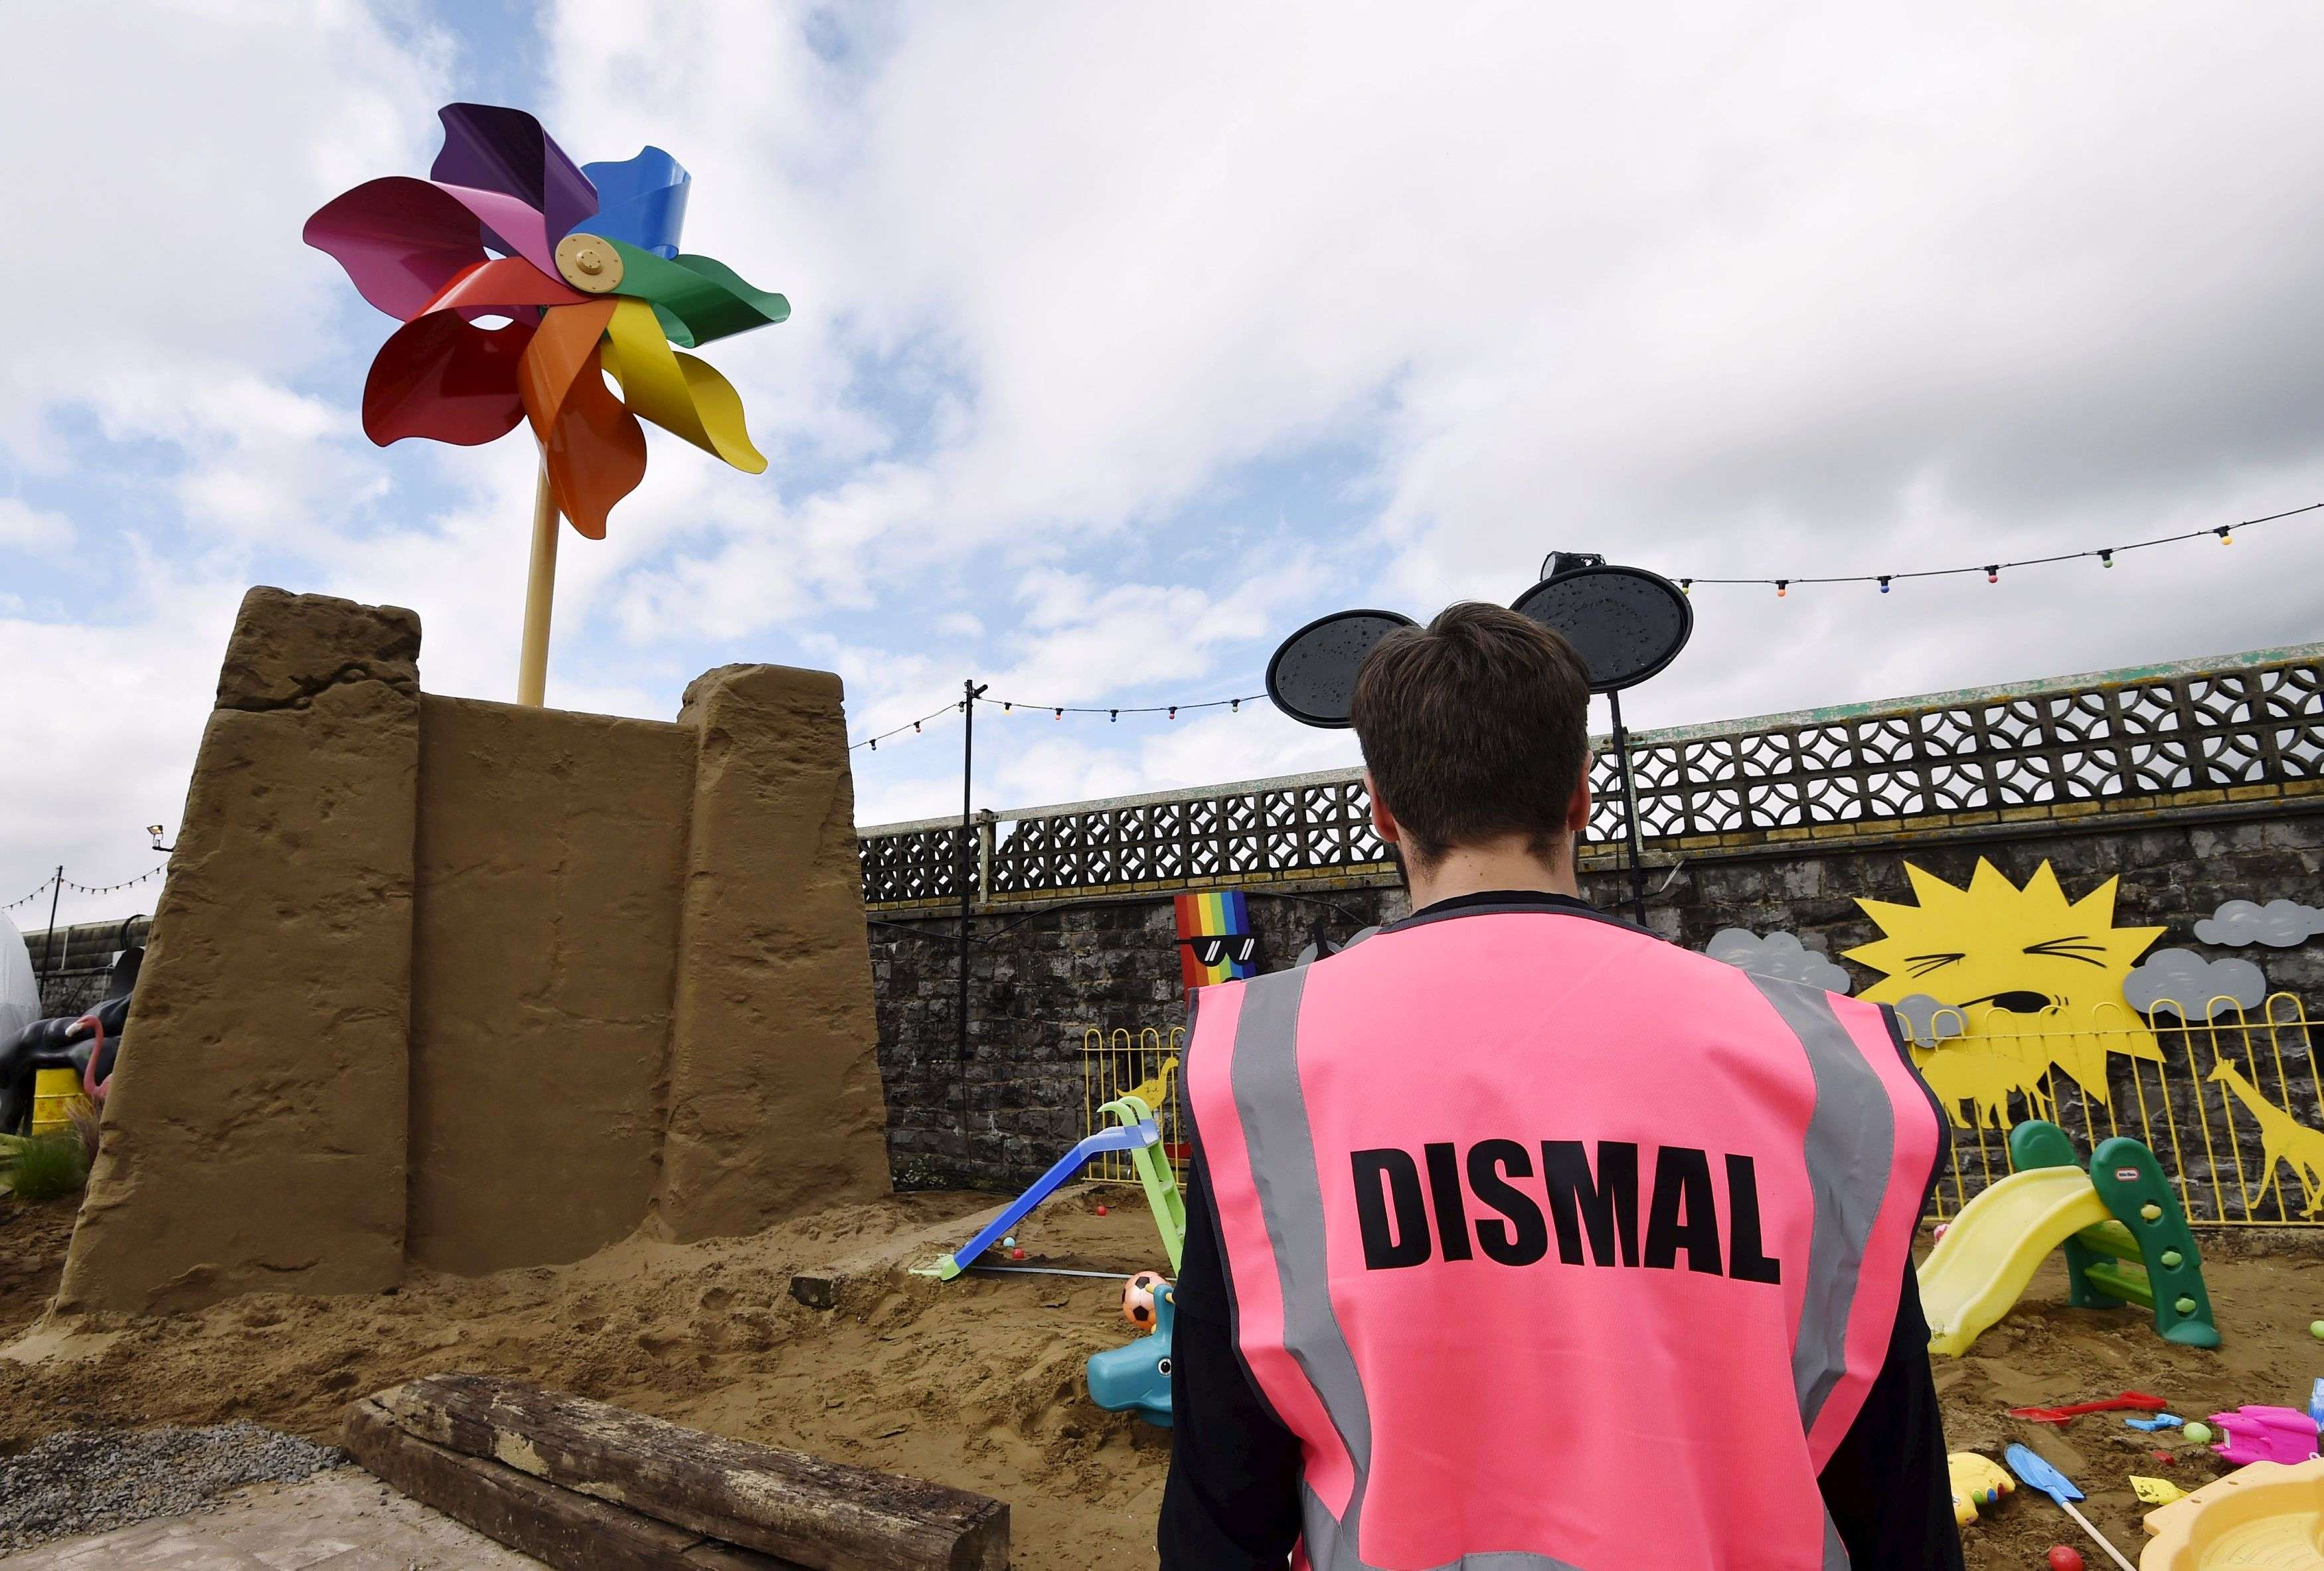 A performer is pictured in front of a sculpture at 'Dismaland', a theme park-styled art  installation by British artist Banksy, at Weston-Super-Mare in southwest England, Britain, August 20, 2015. REUTERS/Toby Melville